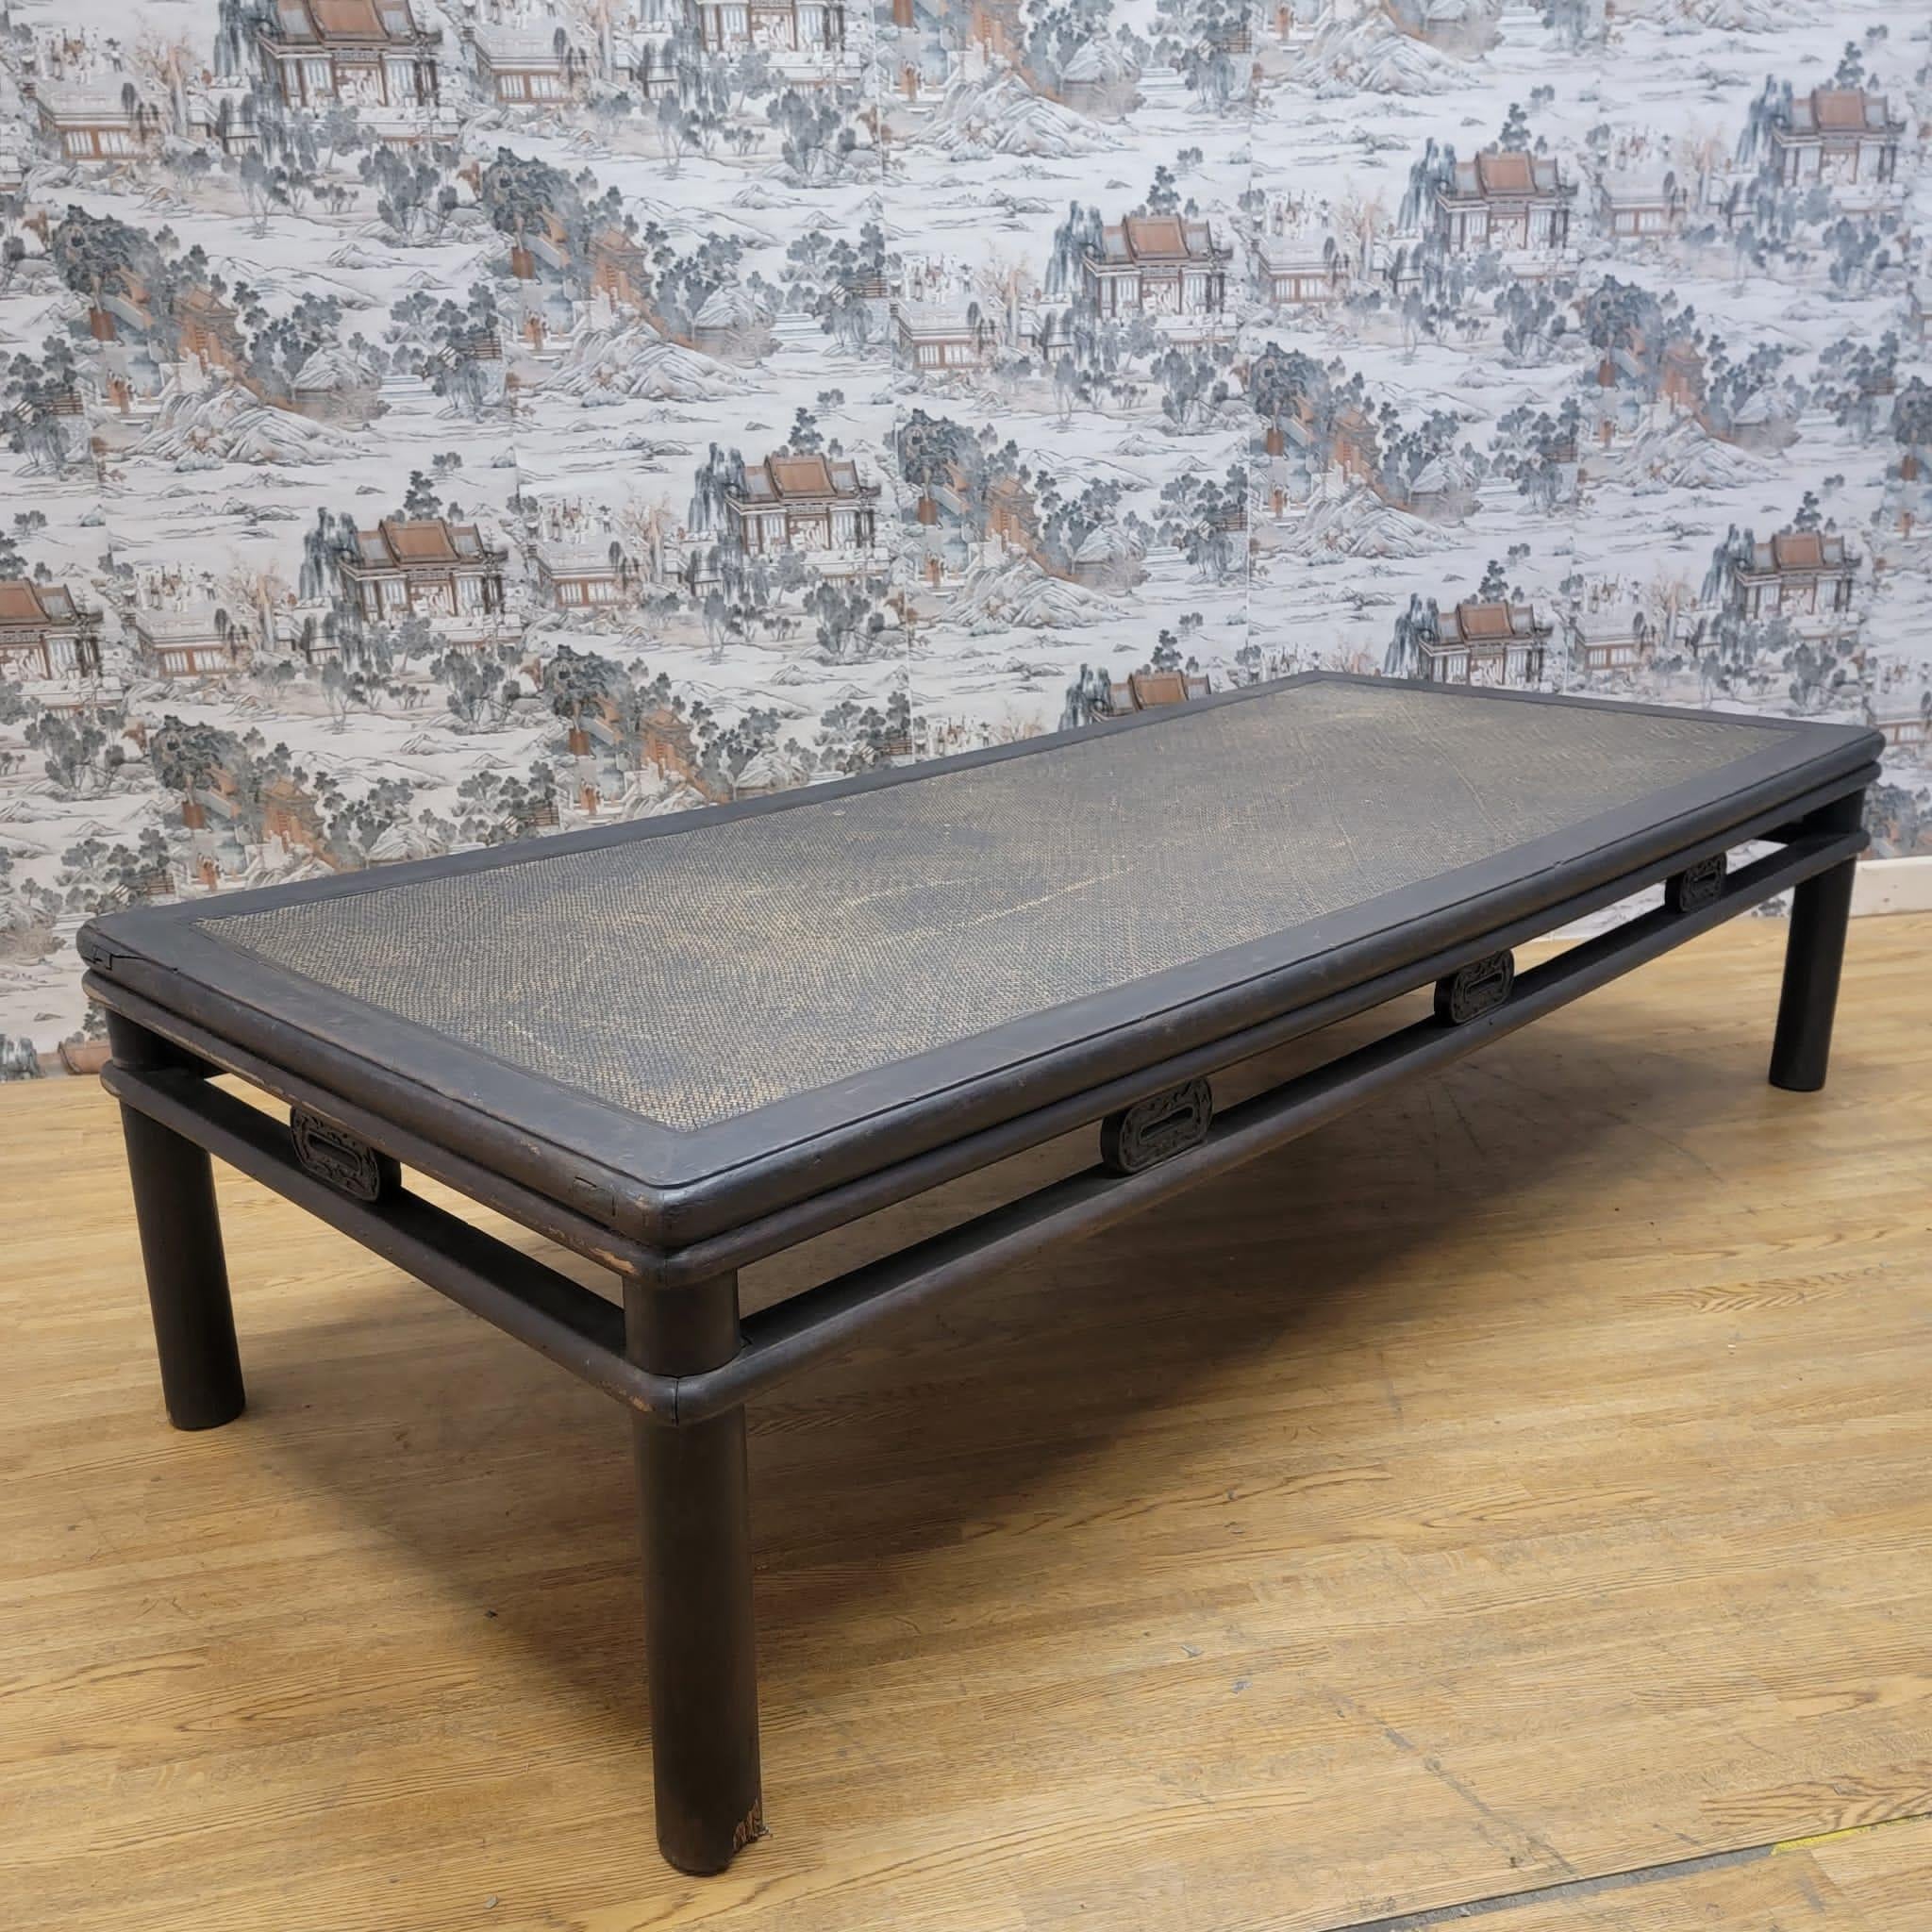 Antique Shanxi province hand woven rattan top elm coffee table

This elm wood round leghed coffee table and hand woven rattan top is backed with solid elm wood beneath for durability and strength. This coffee table has its original color and